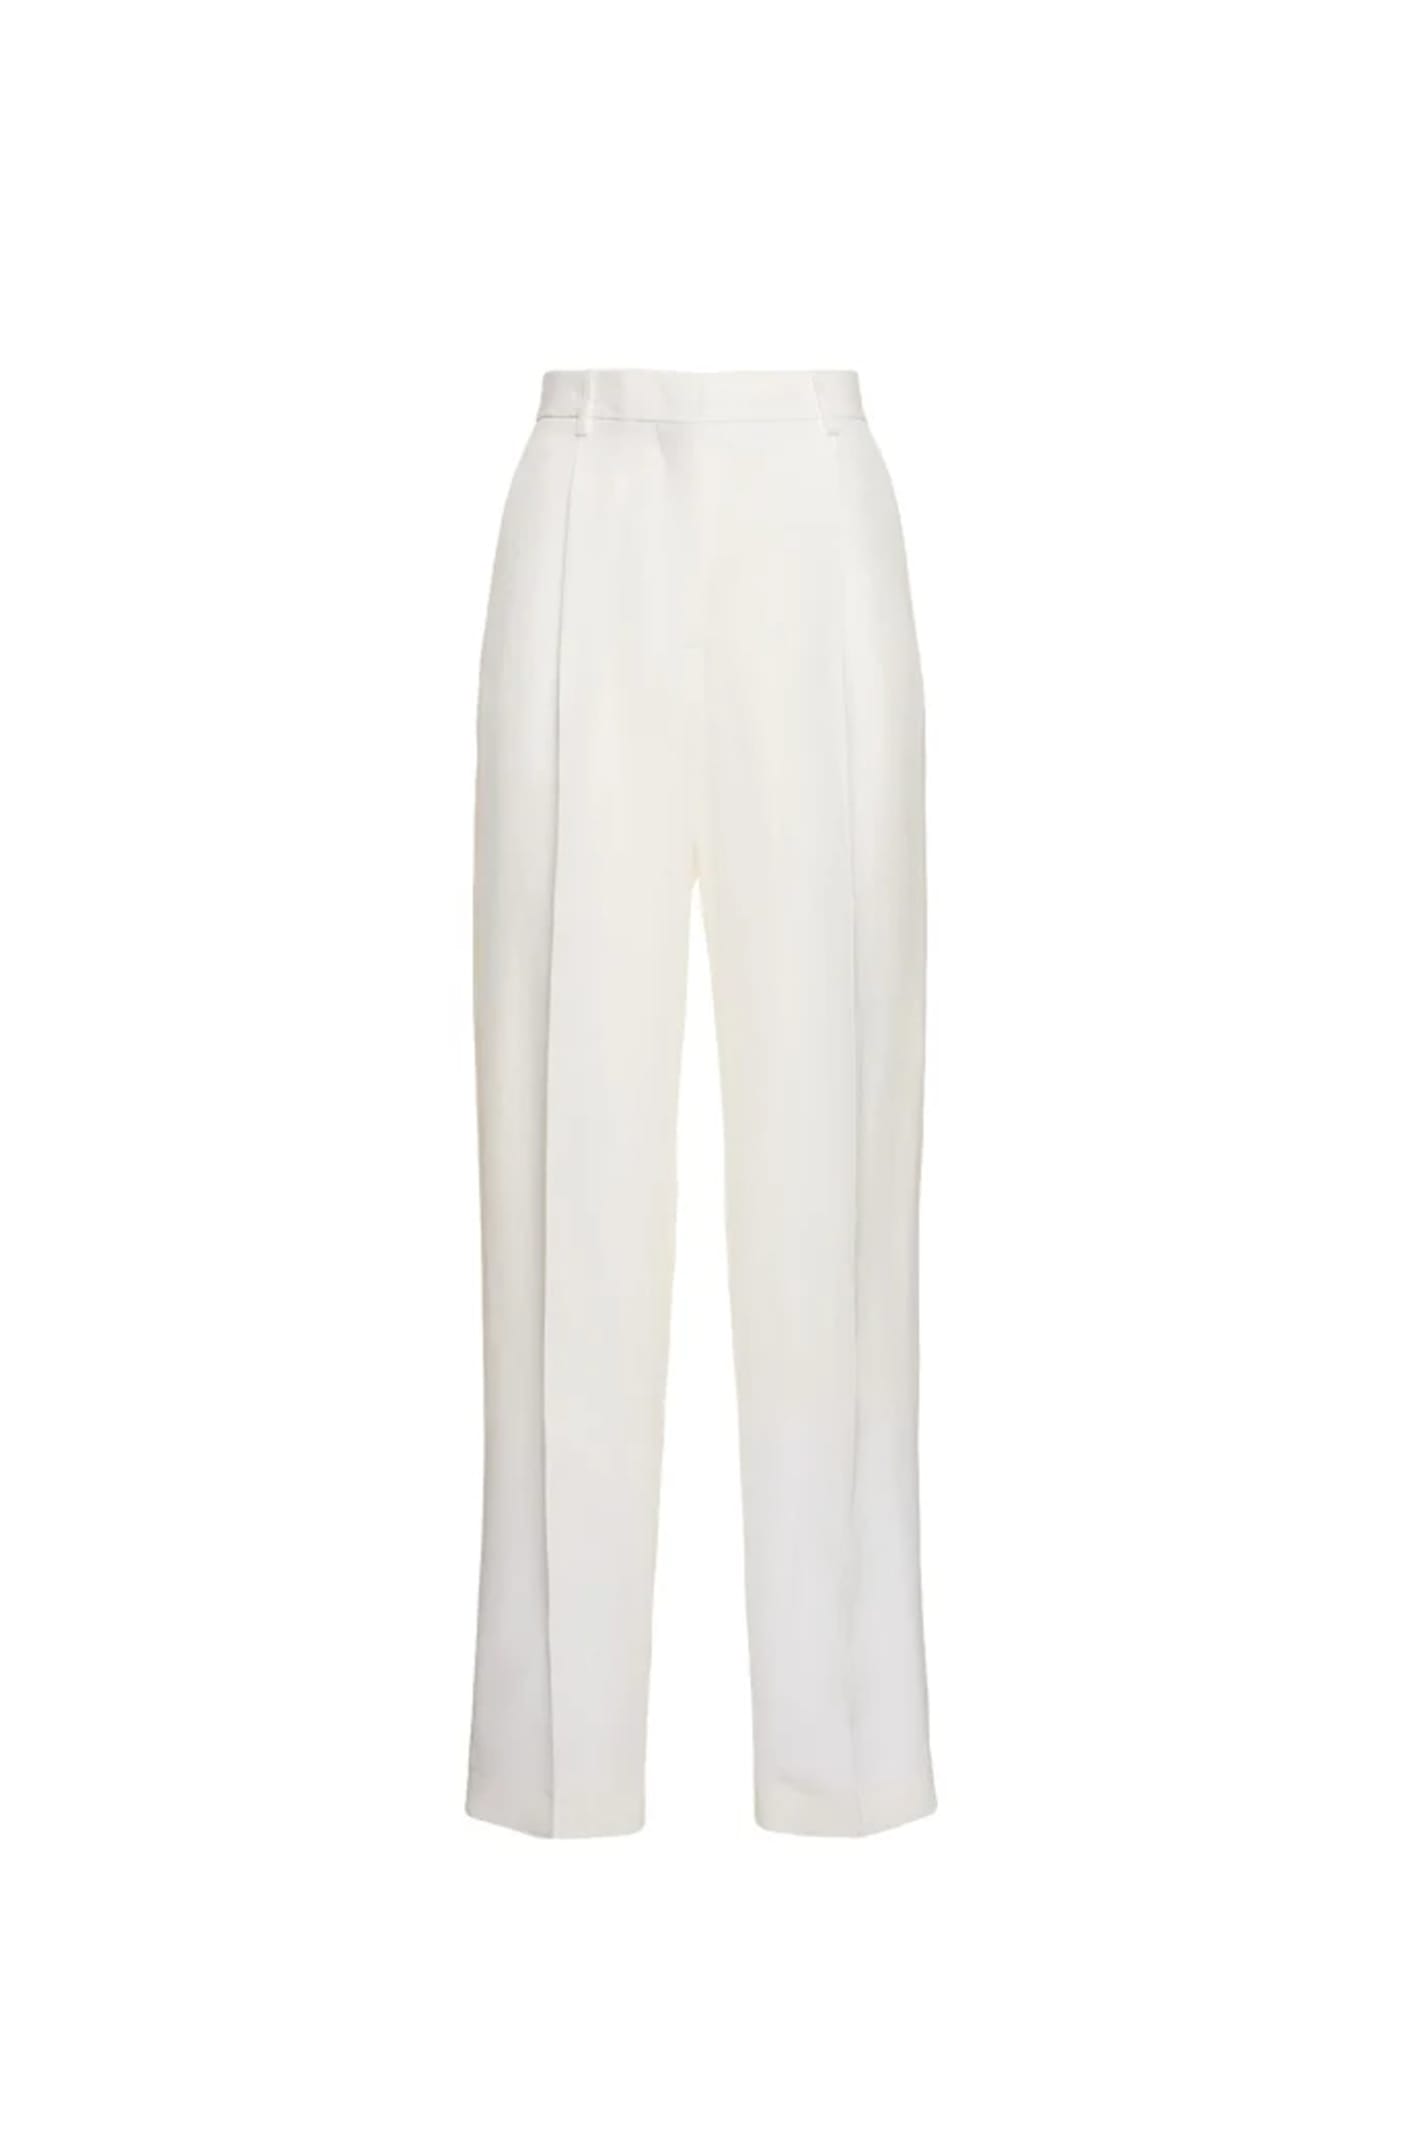 Msgm Pants In White